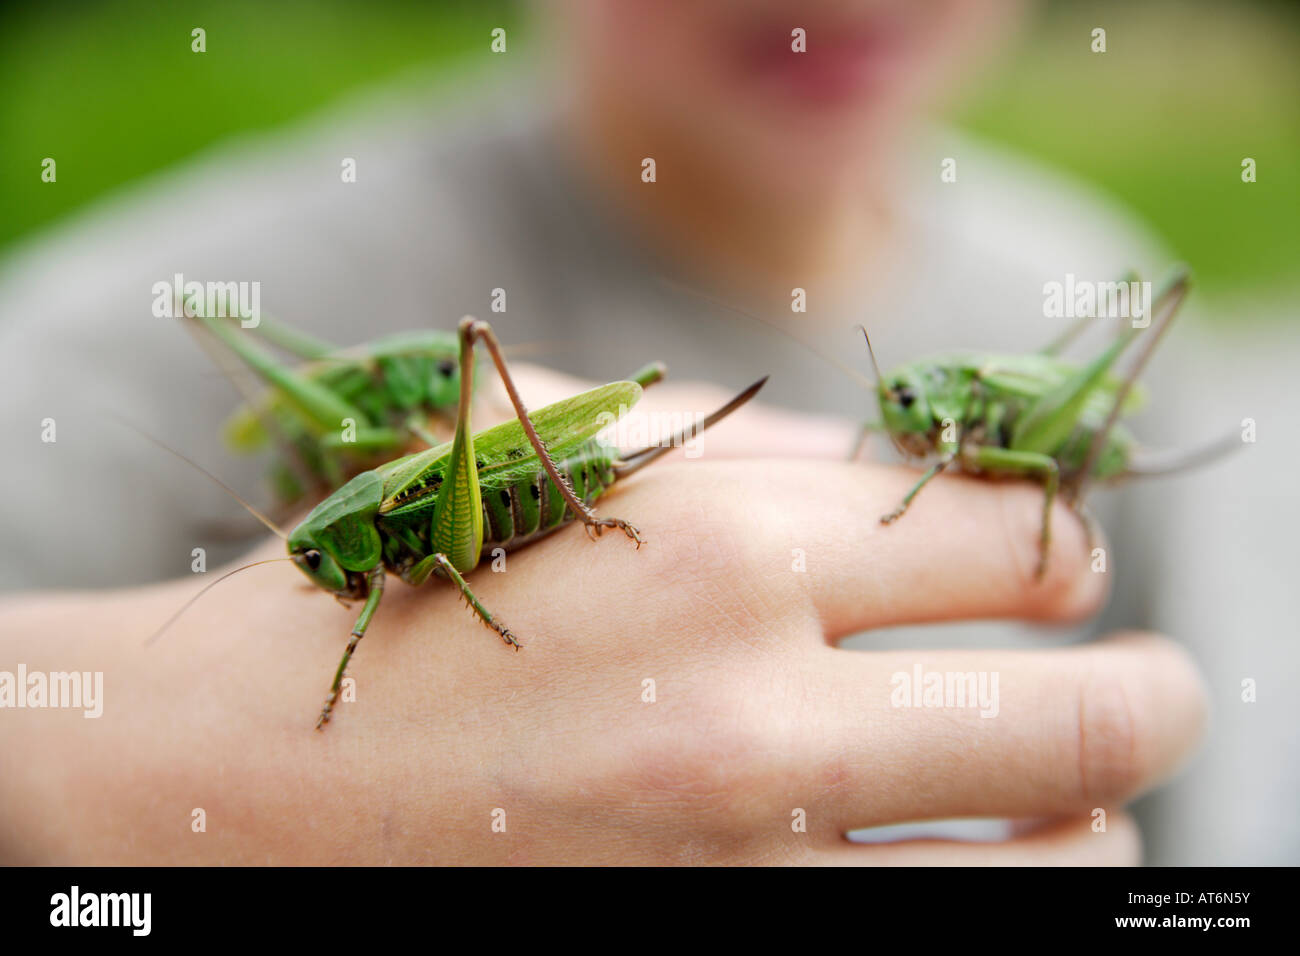 Boy holding long-horned grasshopper, close-up of hand Stock Photo